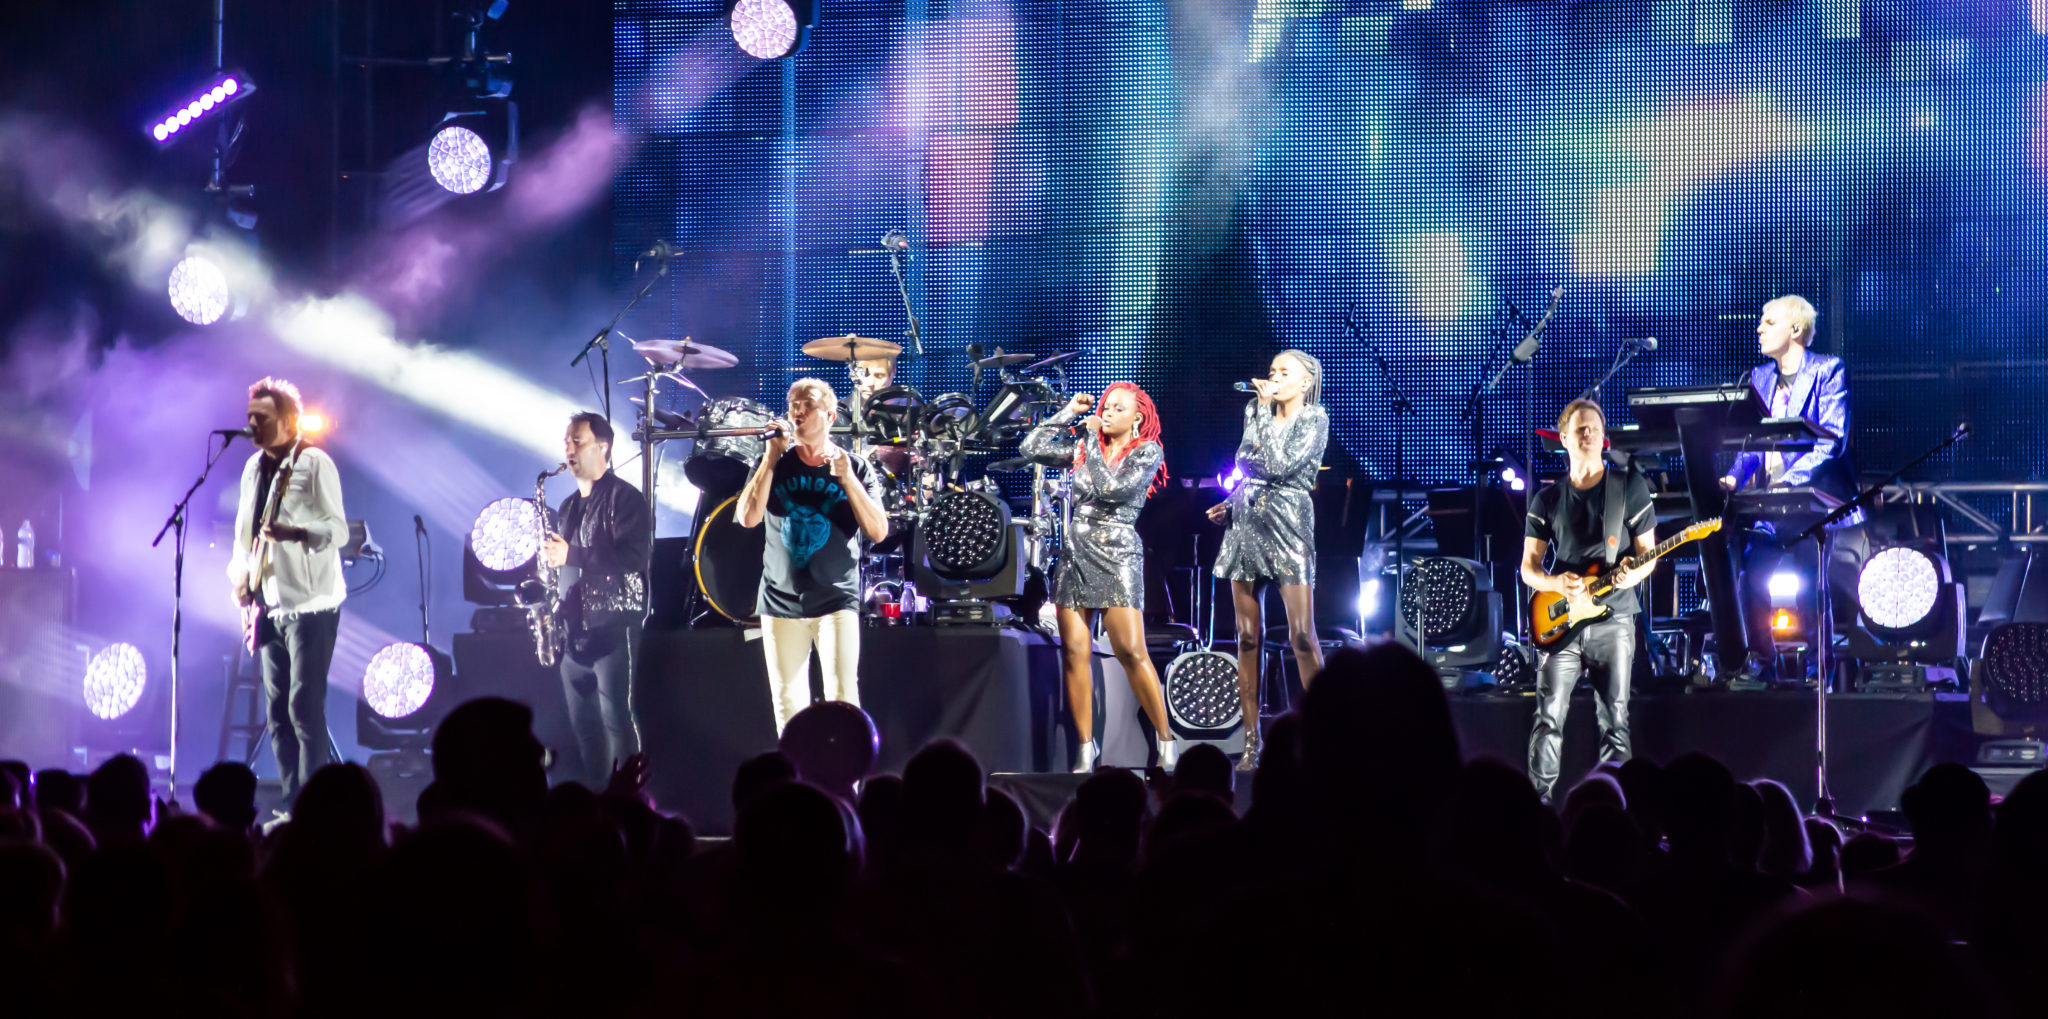 Concert Review Duran Duran Touches the Moon from Earth